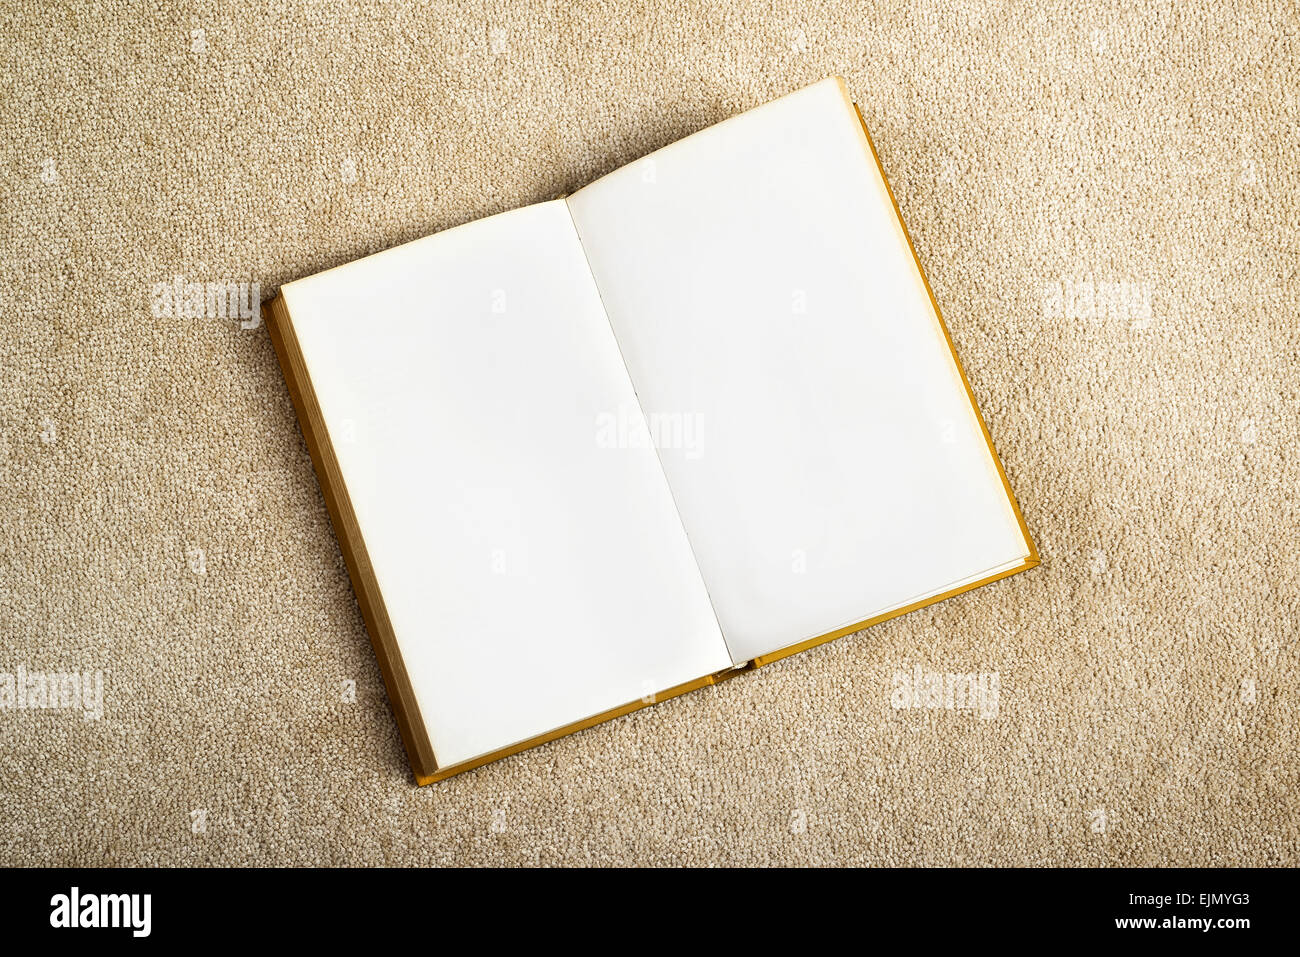 Vintage Book with Blank Pages as Copy Space on the New Beige Carpet Floor Stock Photo